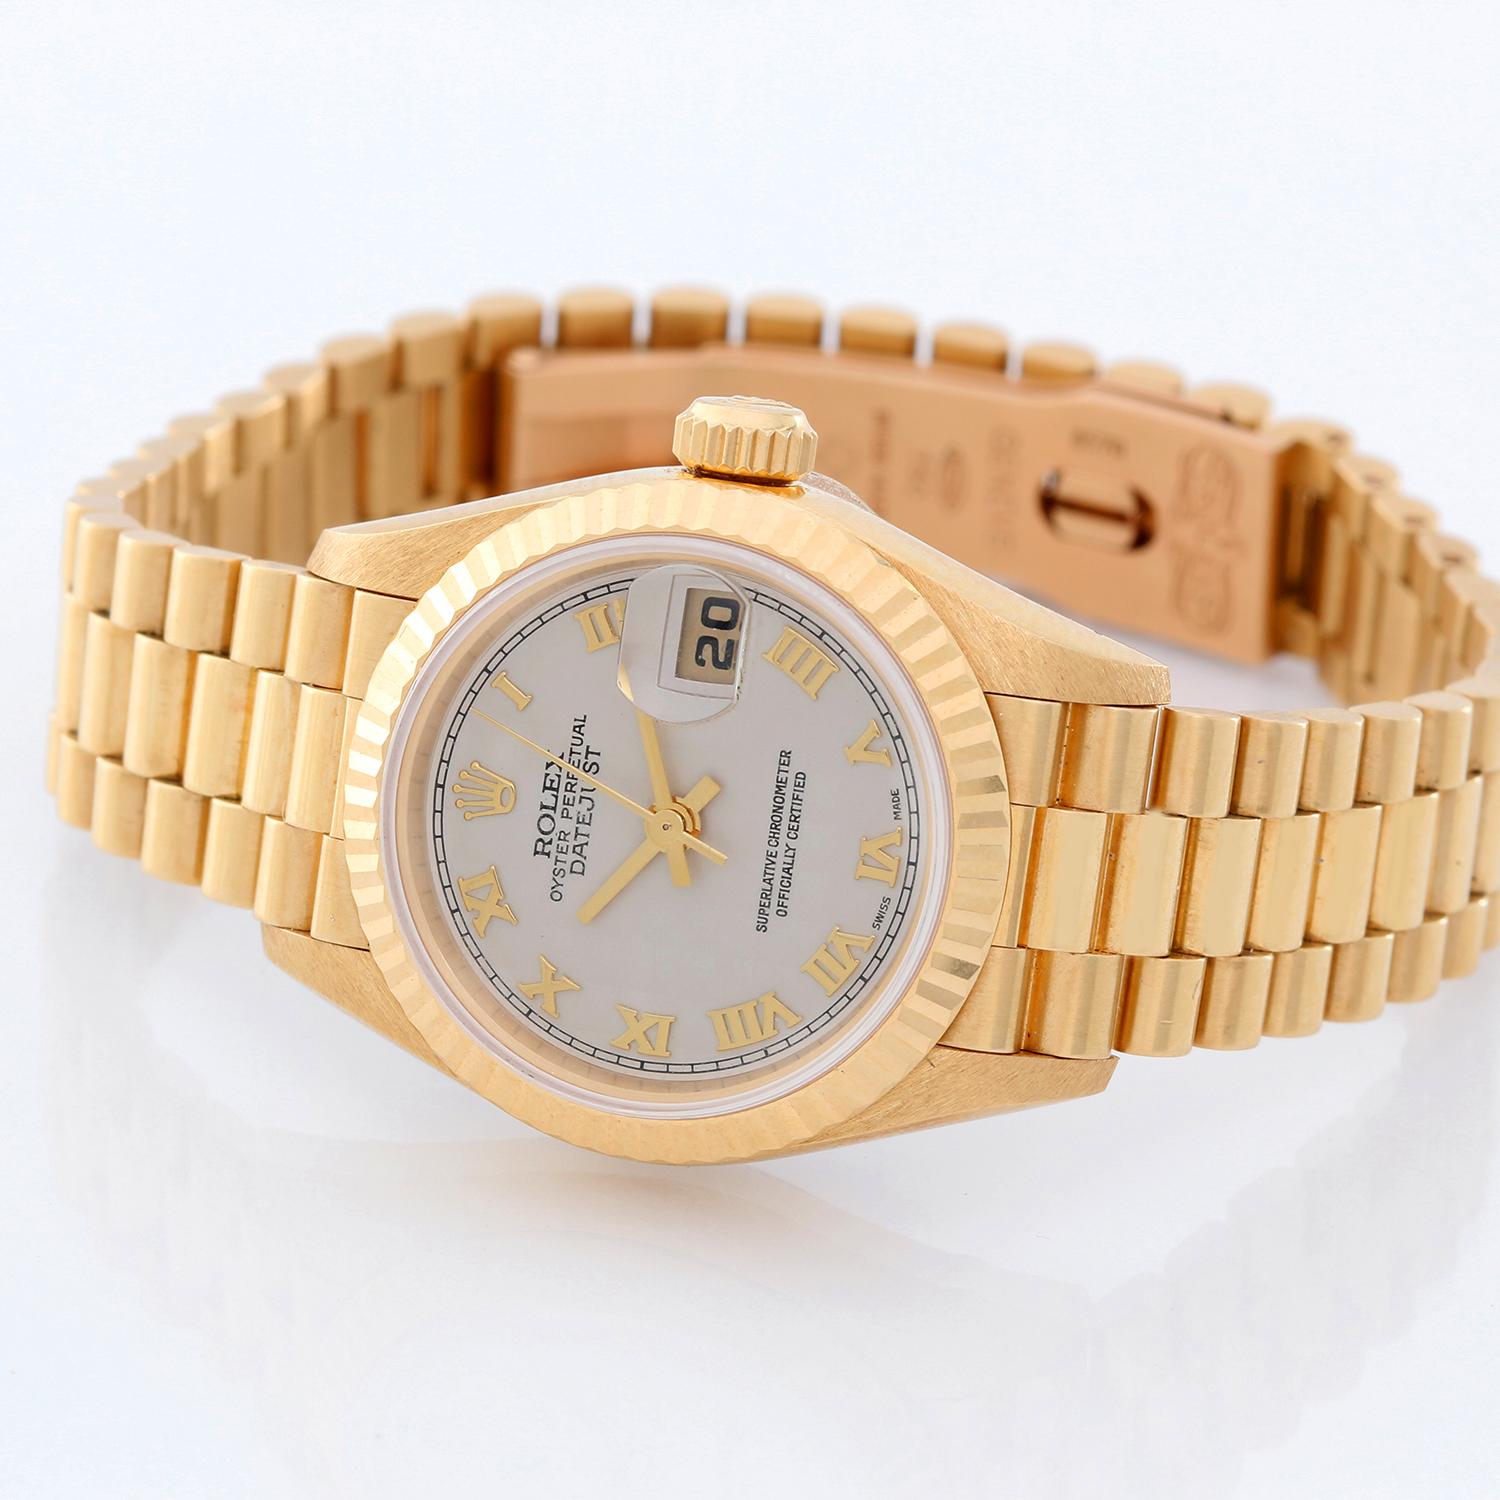 Rolex Ladies President 18k Yellow Gold Watch 79178 - Automatic winding, 31 jewels, Quickset date, sapphire crystal. 18k yellow gold case with factory diamond bezel  (26mm diameter). Cream Pyramid dial with Roman numerals. 18k yellow gold Rolex